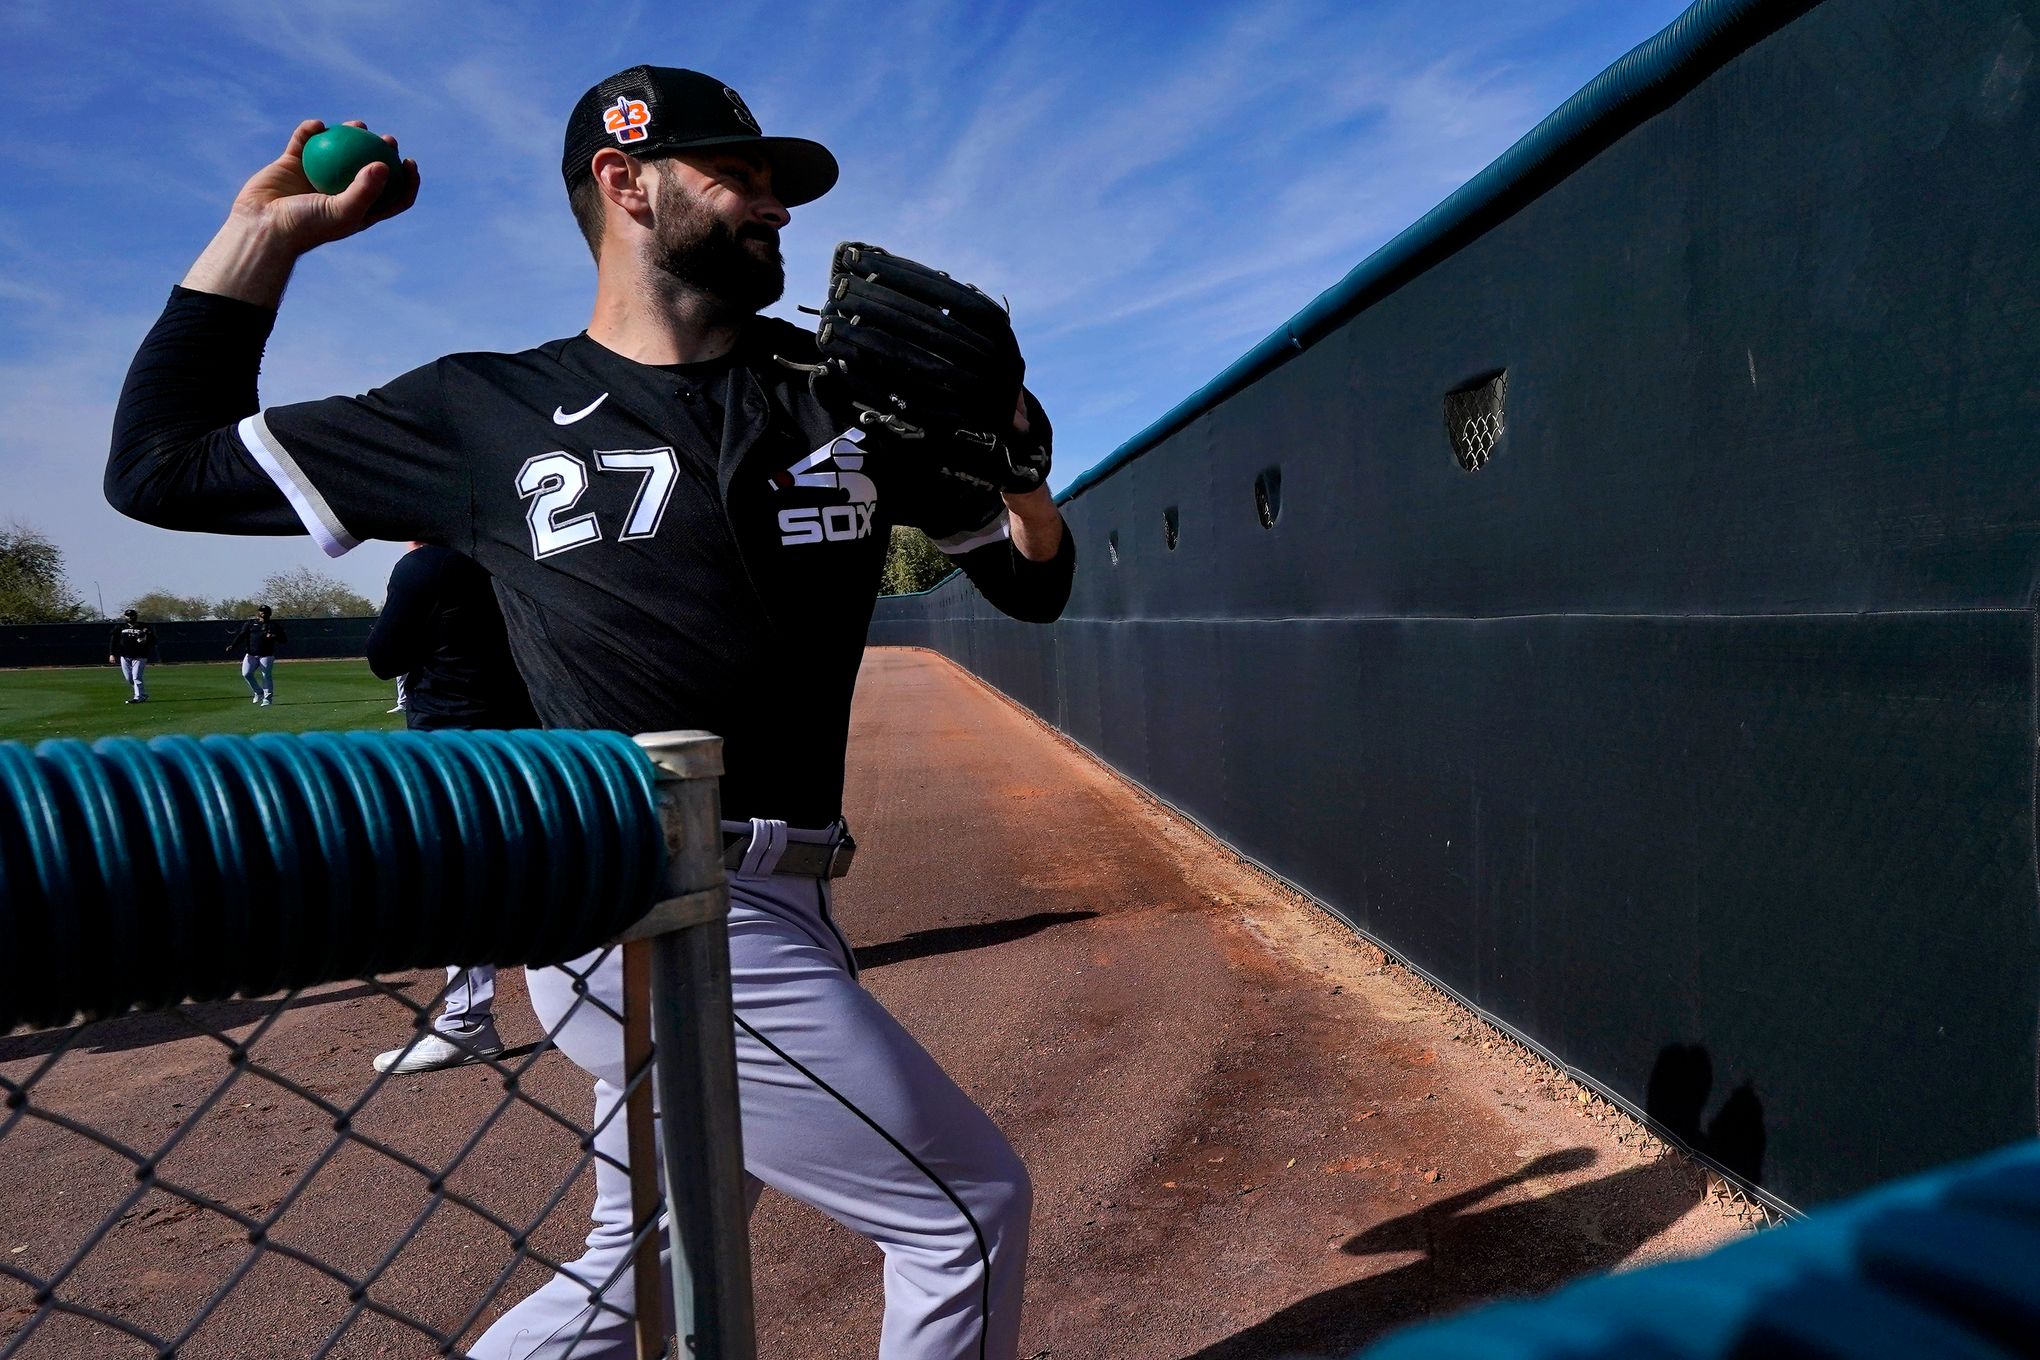 With first half in the books, time to find out if Lucas Giolito